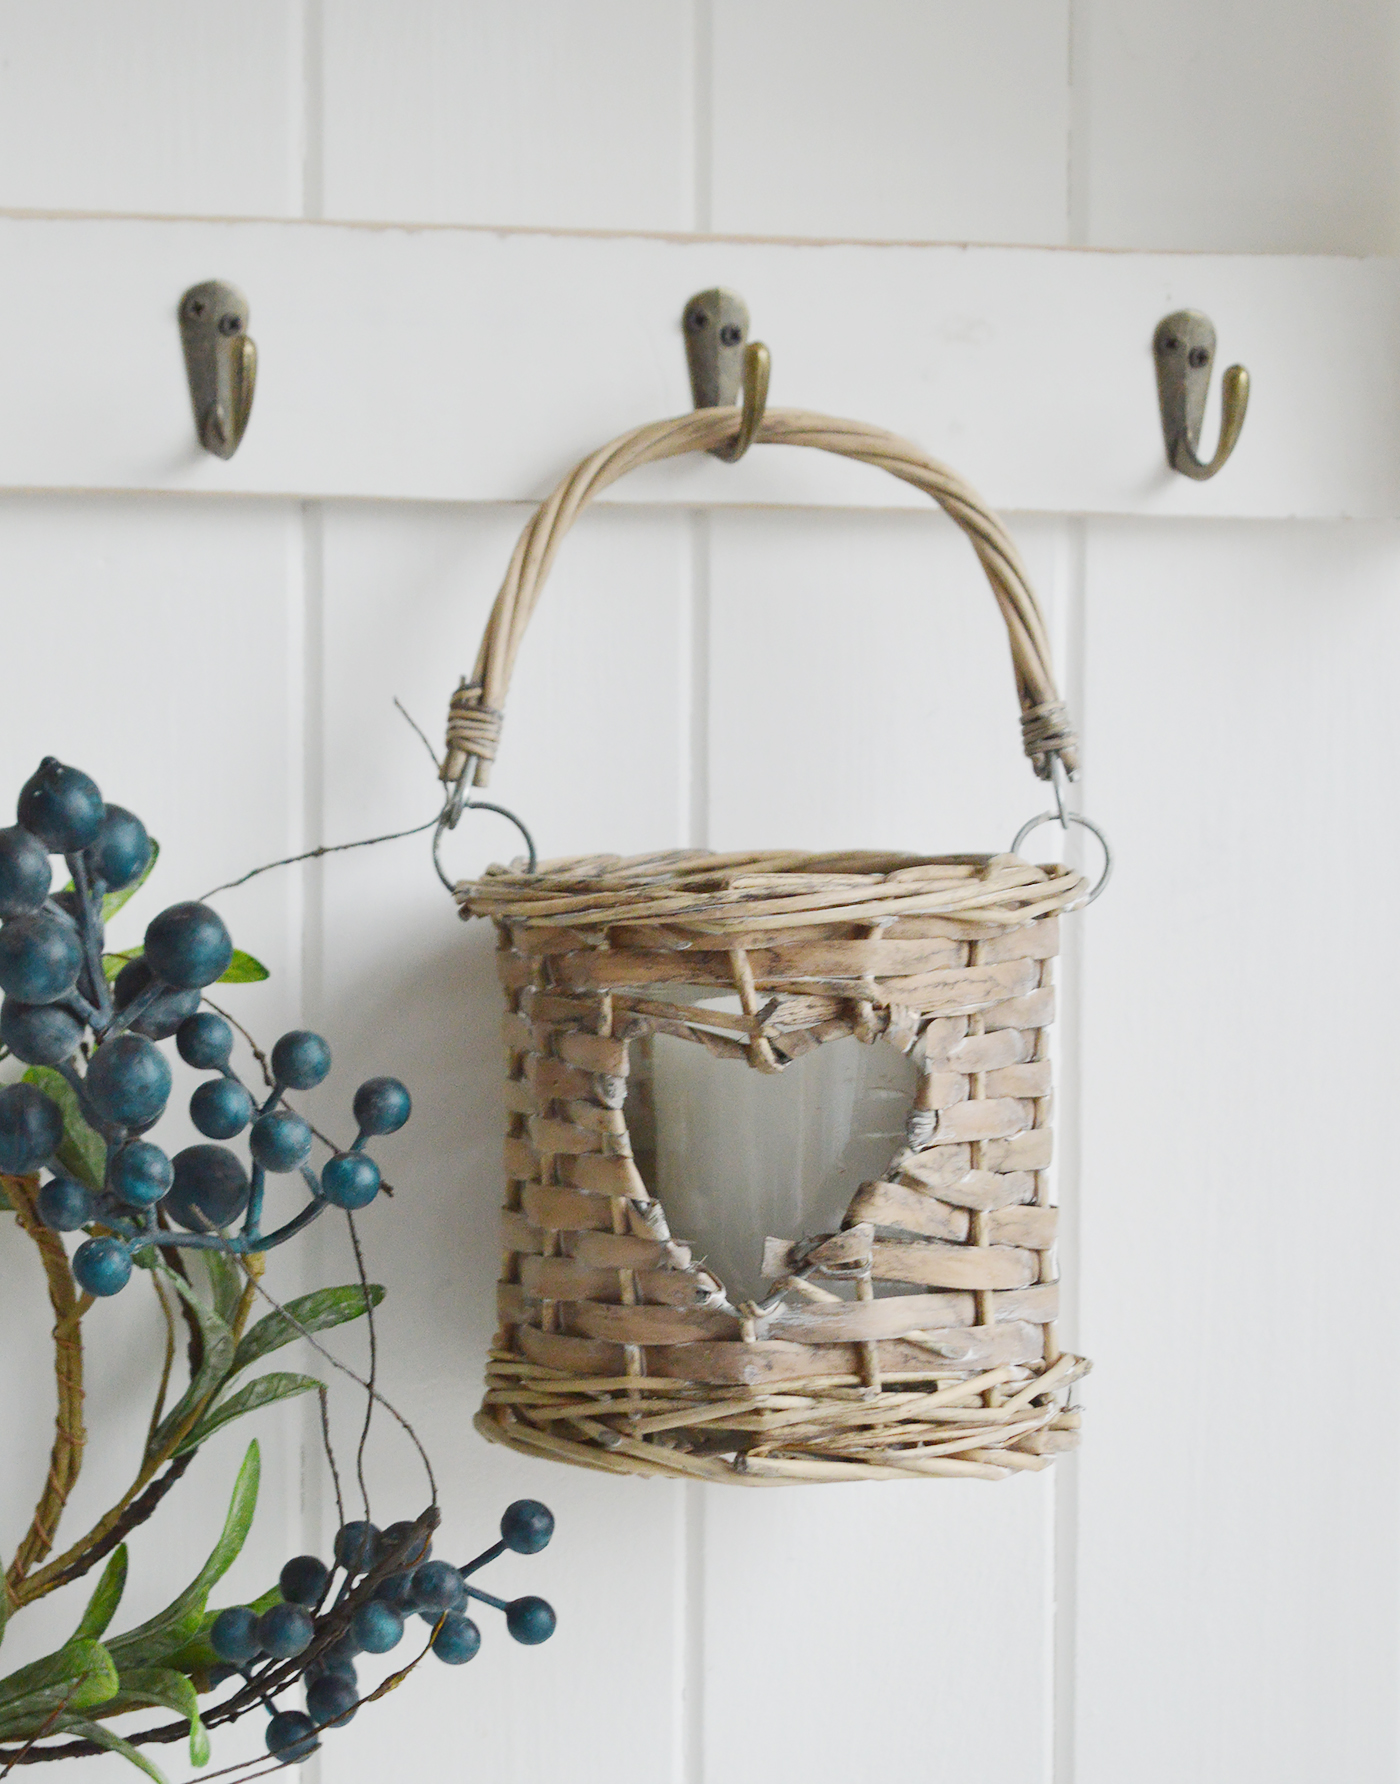 A grey willow heart candle holder from The White Lighthouse furniture and accessories. New England interiors. Home decor and furniture for coastal, country and city homes